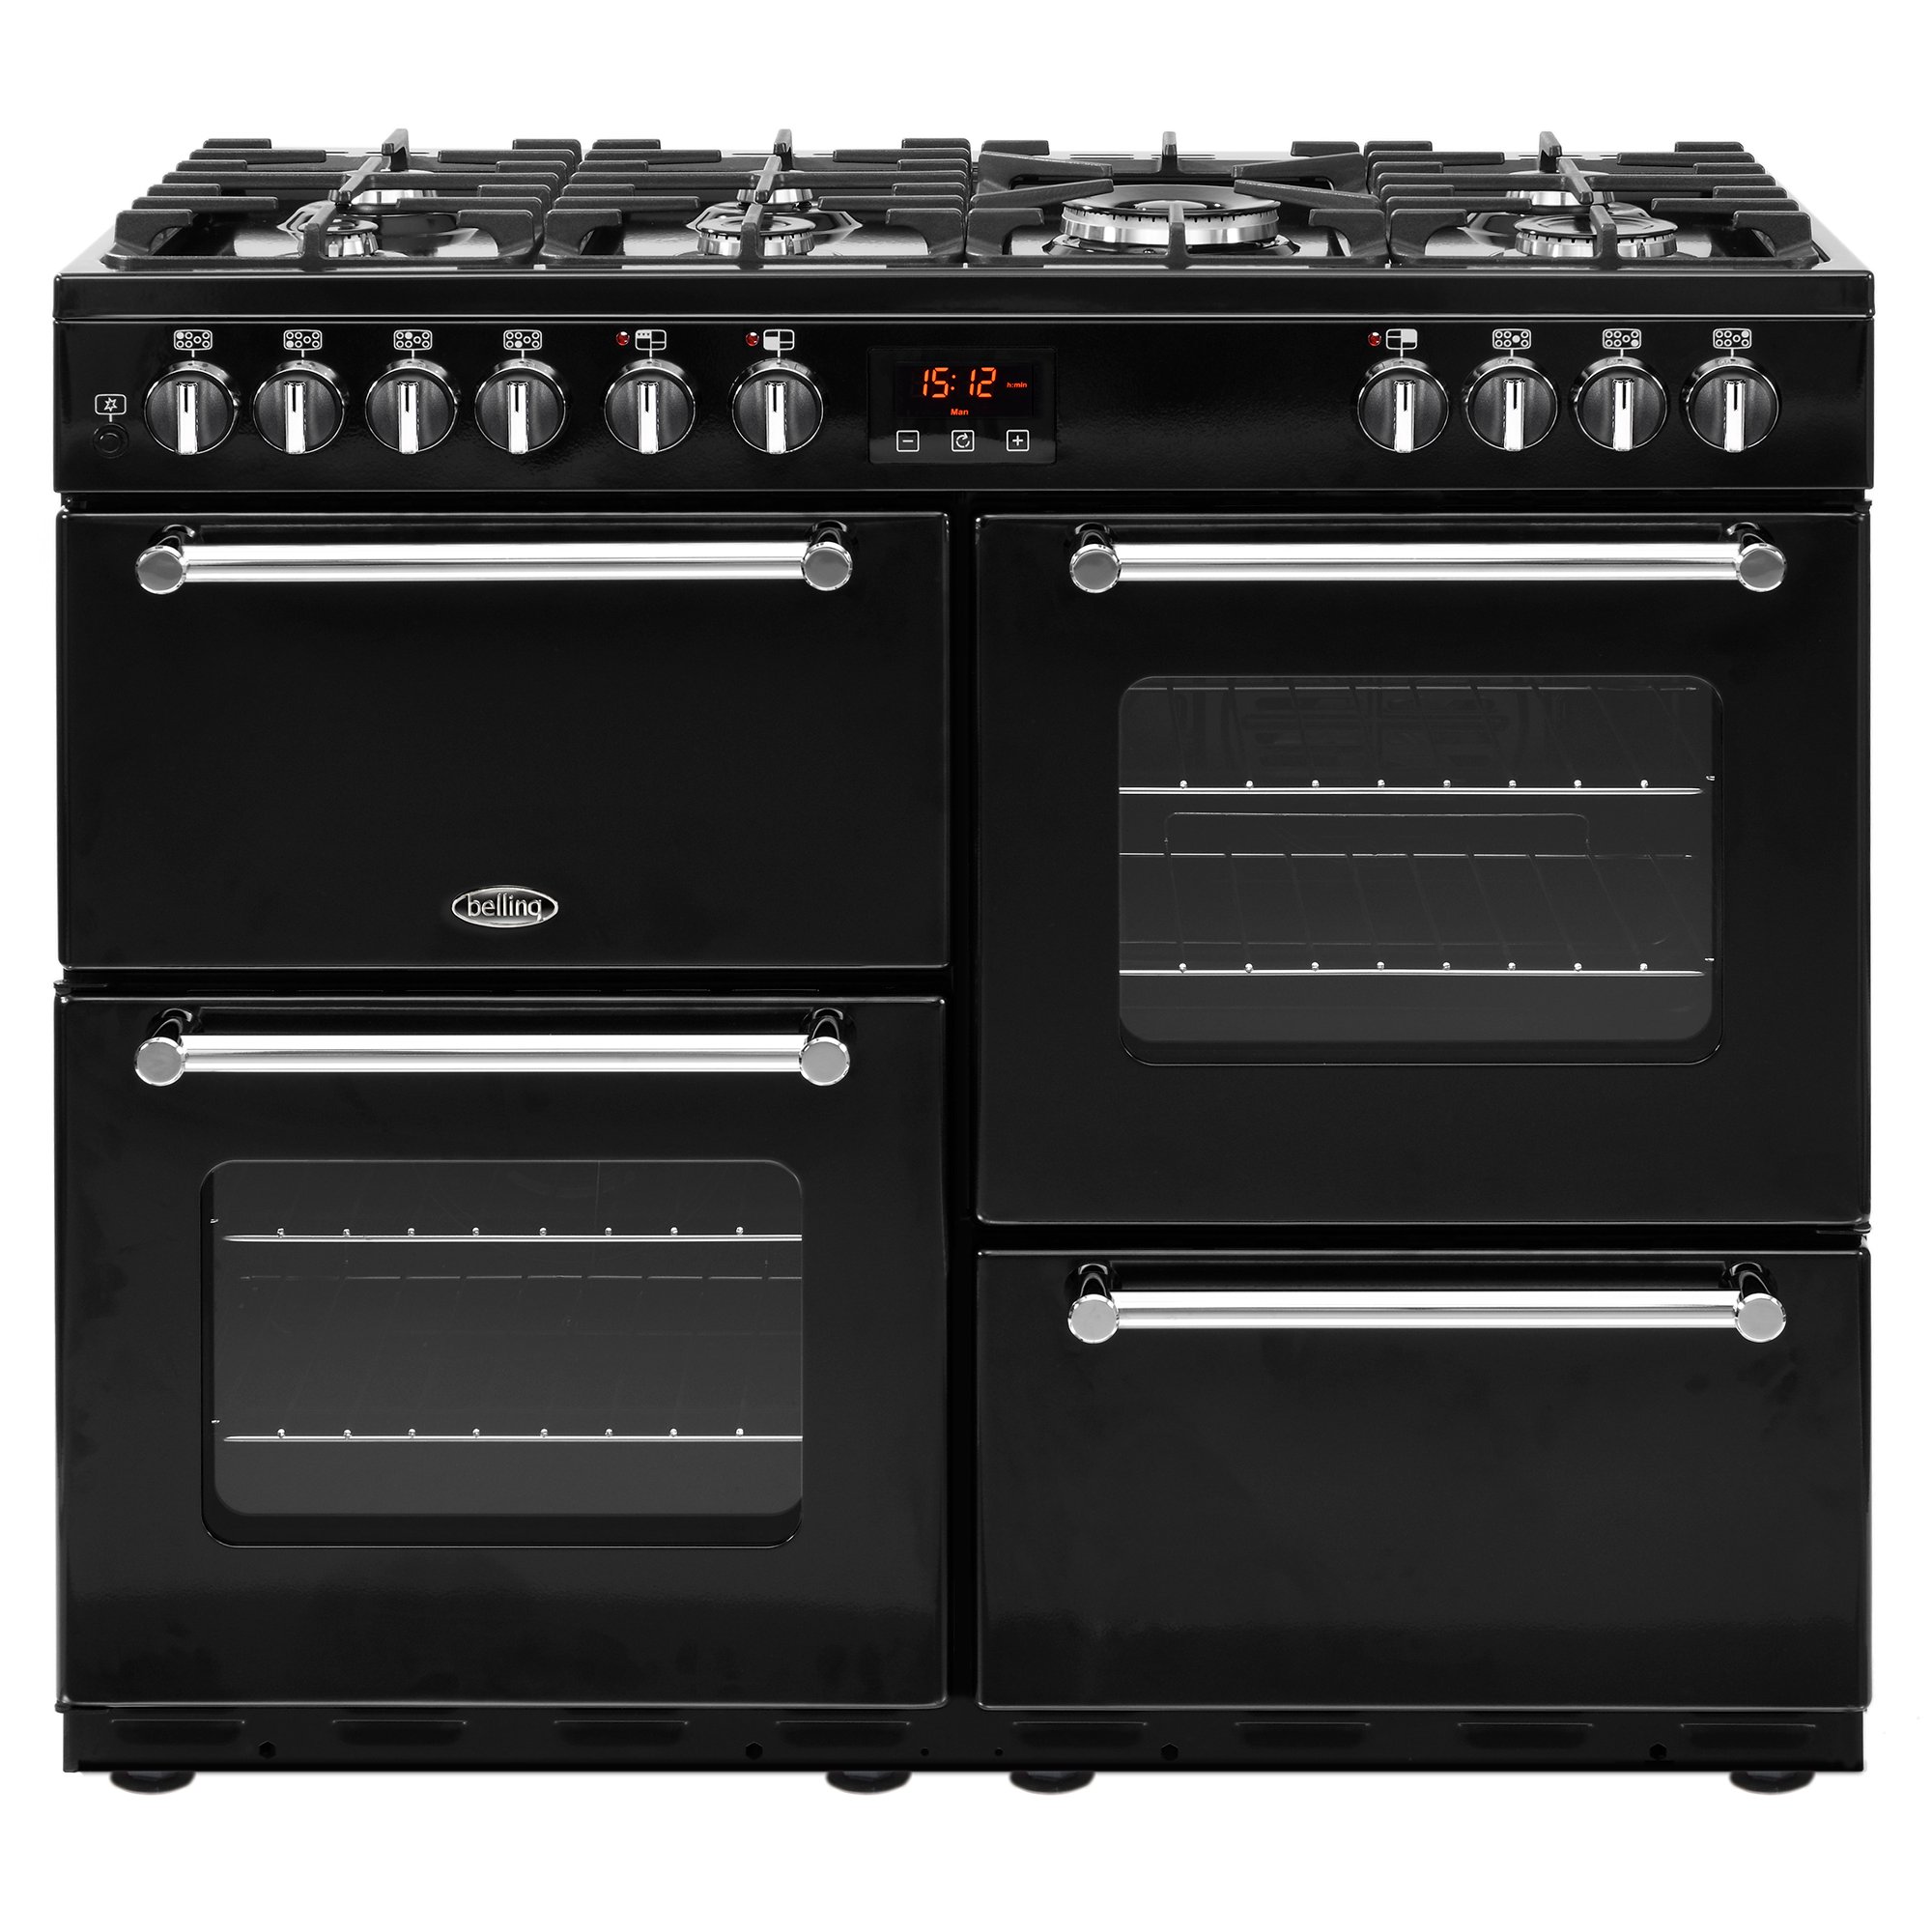 100cm dual fuel range cooker with 7 burner gas hob, Wok Burner, Cast Iron Pan Supports, variable rate electric grill and easy clean enamel.